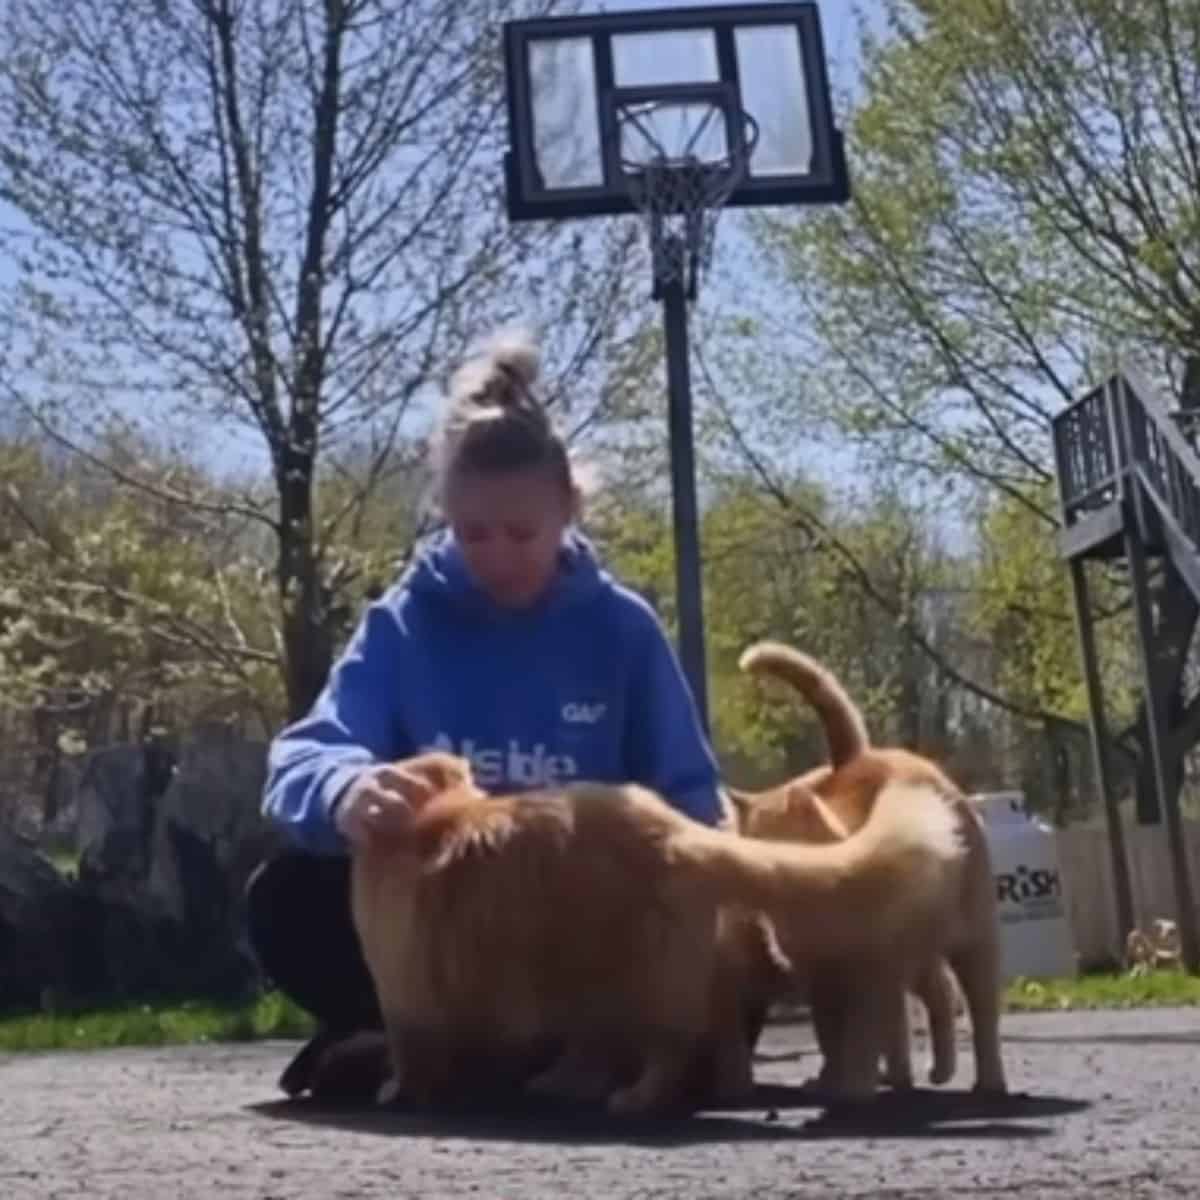 cats and girl at basketball field